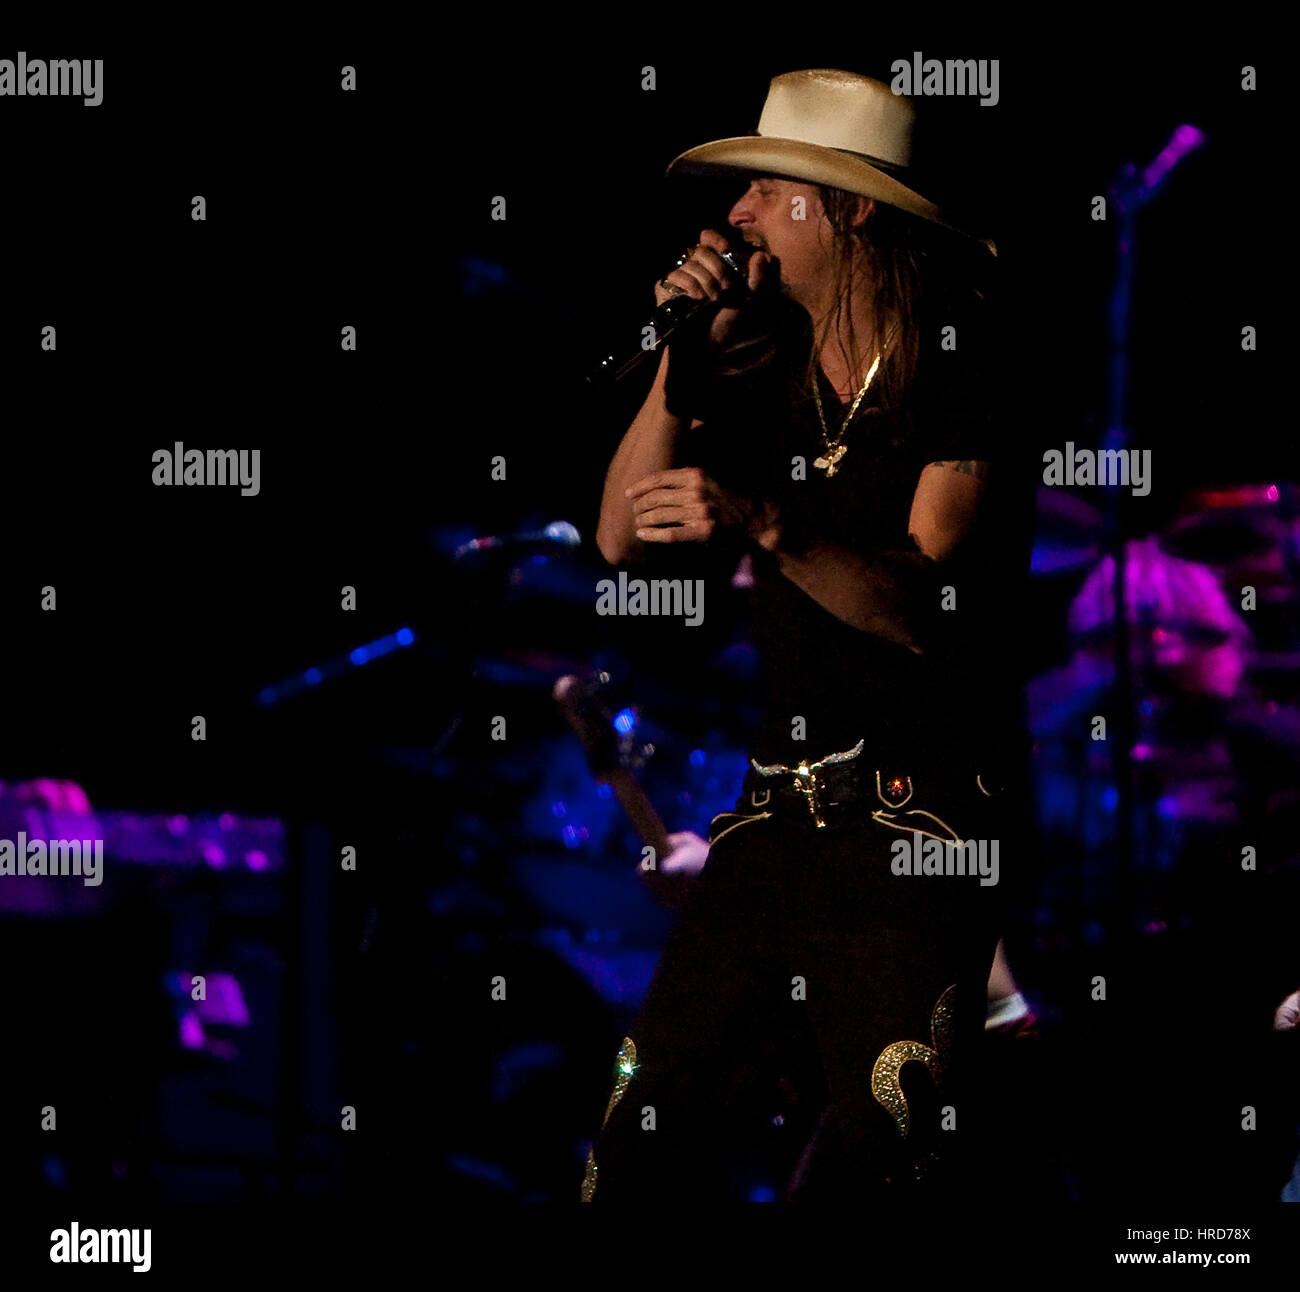 Kid Rock performs at the Stagecoach Country Music Festival in Indio, California, U.S.A on April 26, 2009. Stock Photo